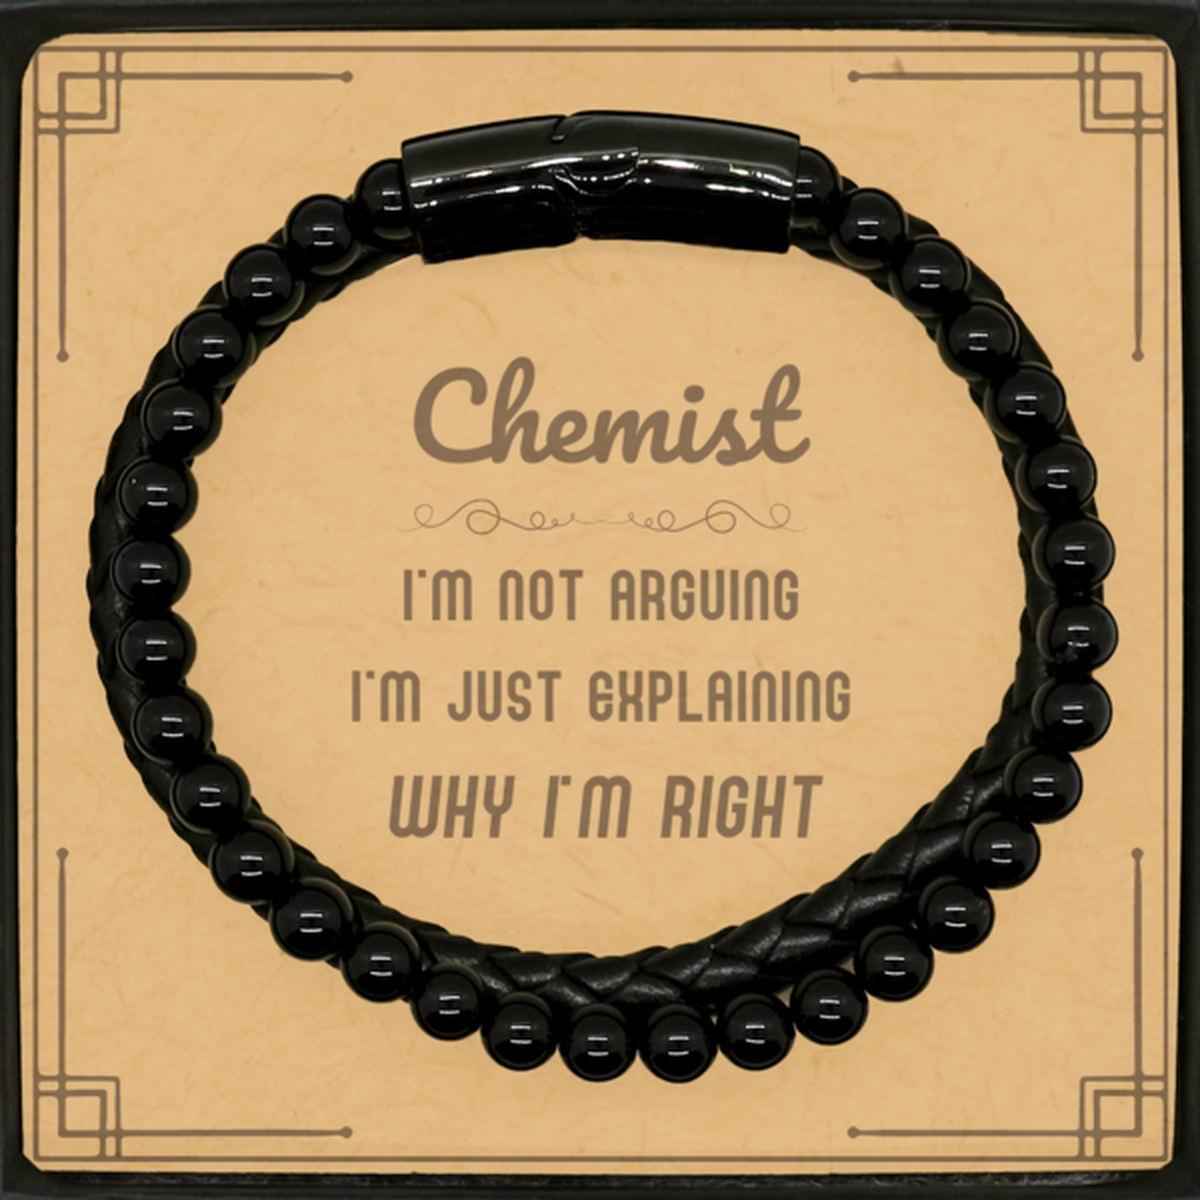 Chemist I'm not Arguing. I'm Just Explaining Why I'm RIGHT Stone Leather Bracelets, Funny Saying Quote Chemist Gifts For Chemist Message Card Graduation Birthday Christmas Gifts for Men Women Coworker